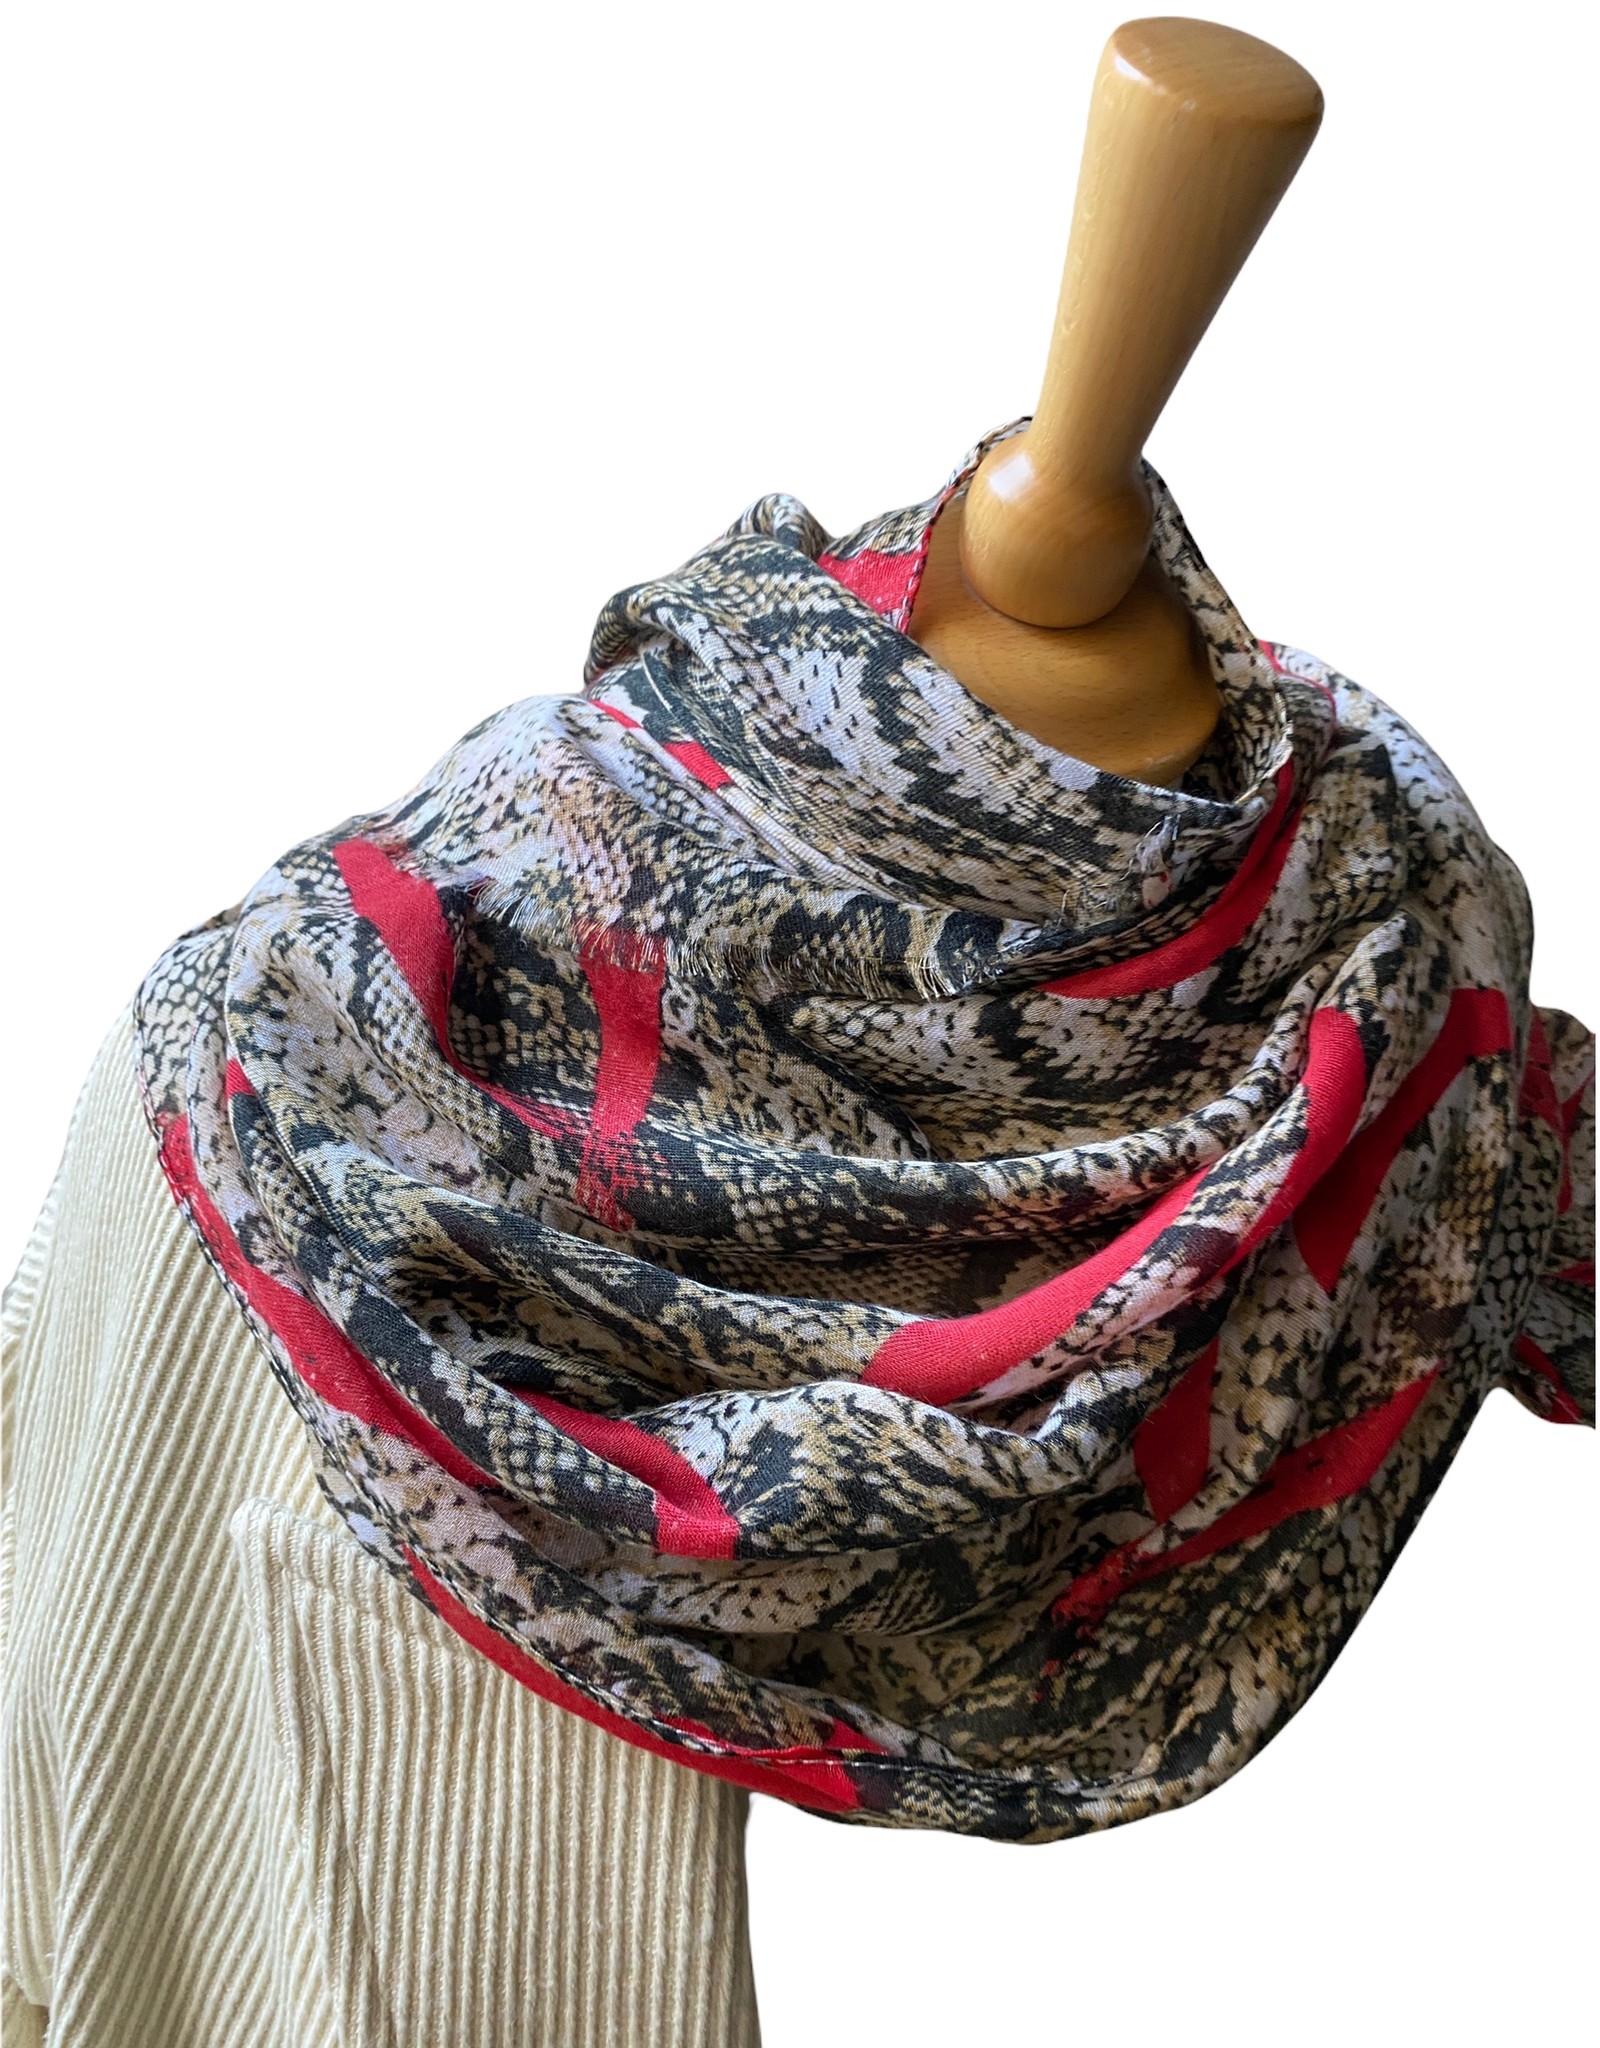 Thin scarf in snakeprint with red hearts.